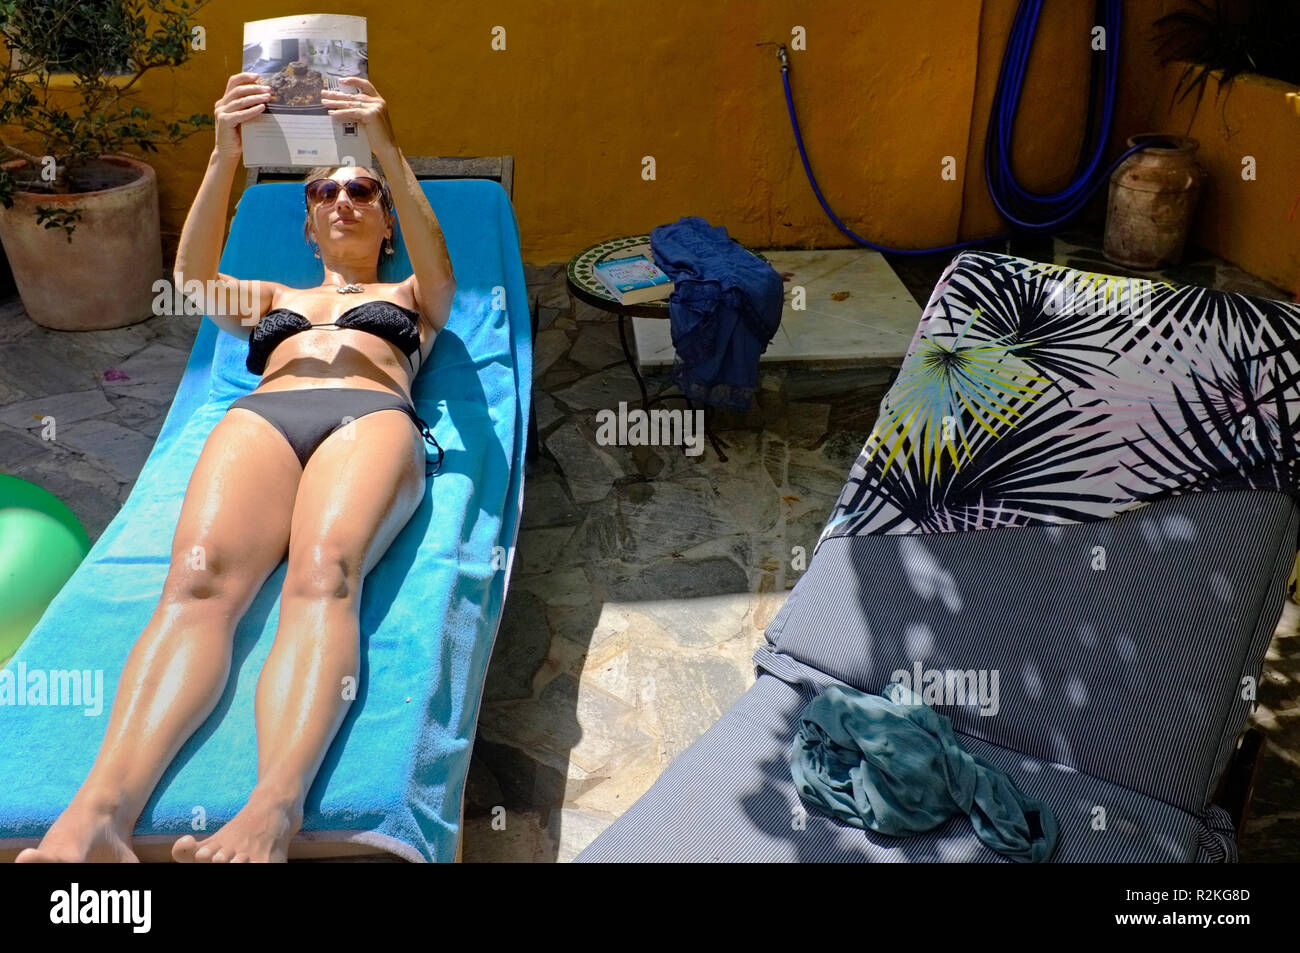 A middle aged female reading on a subbed on her holiday. Stock Photo